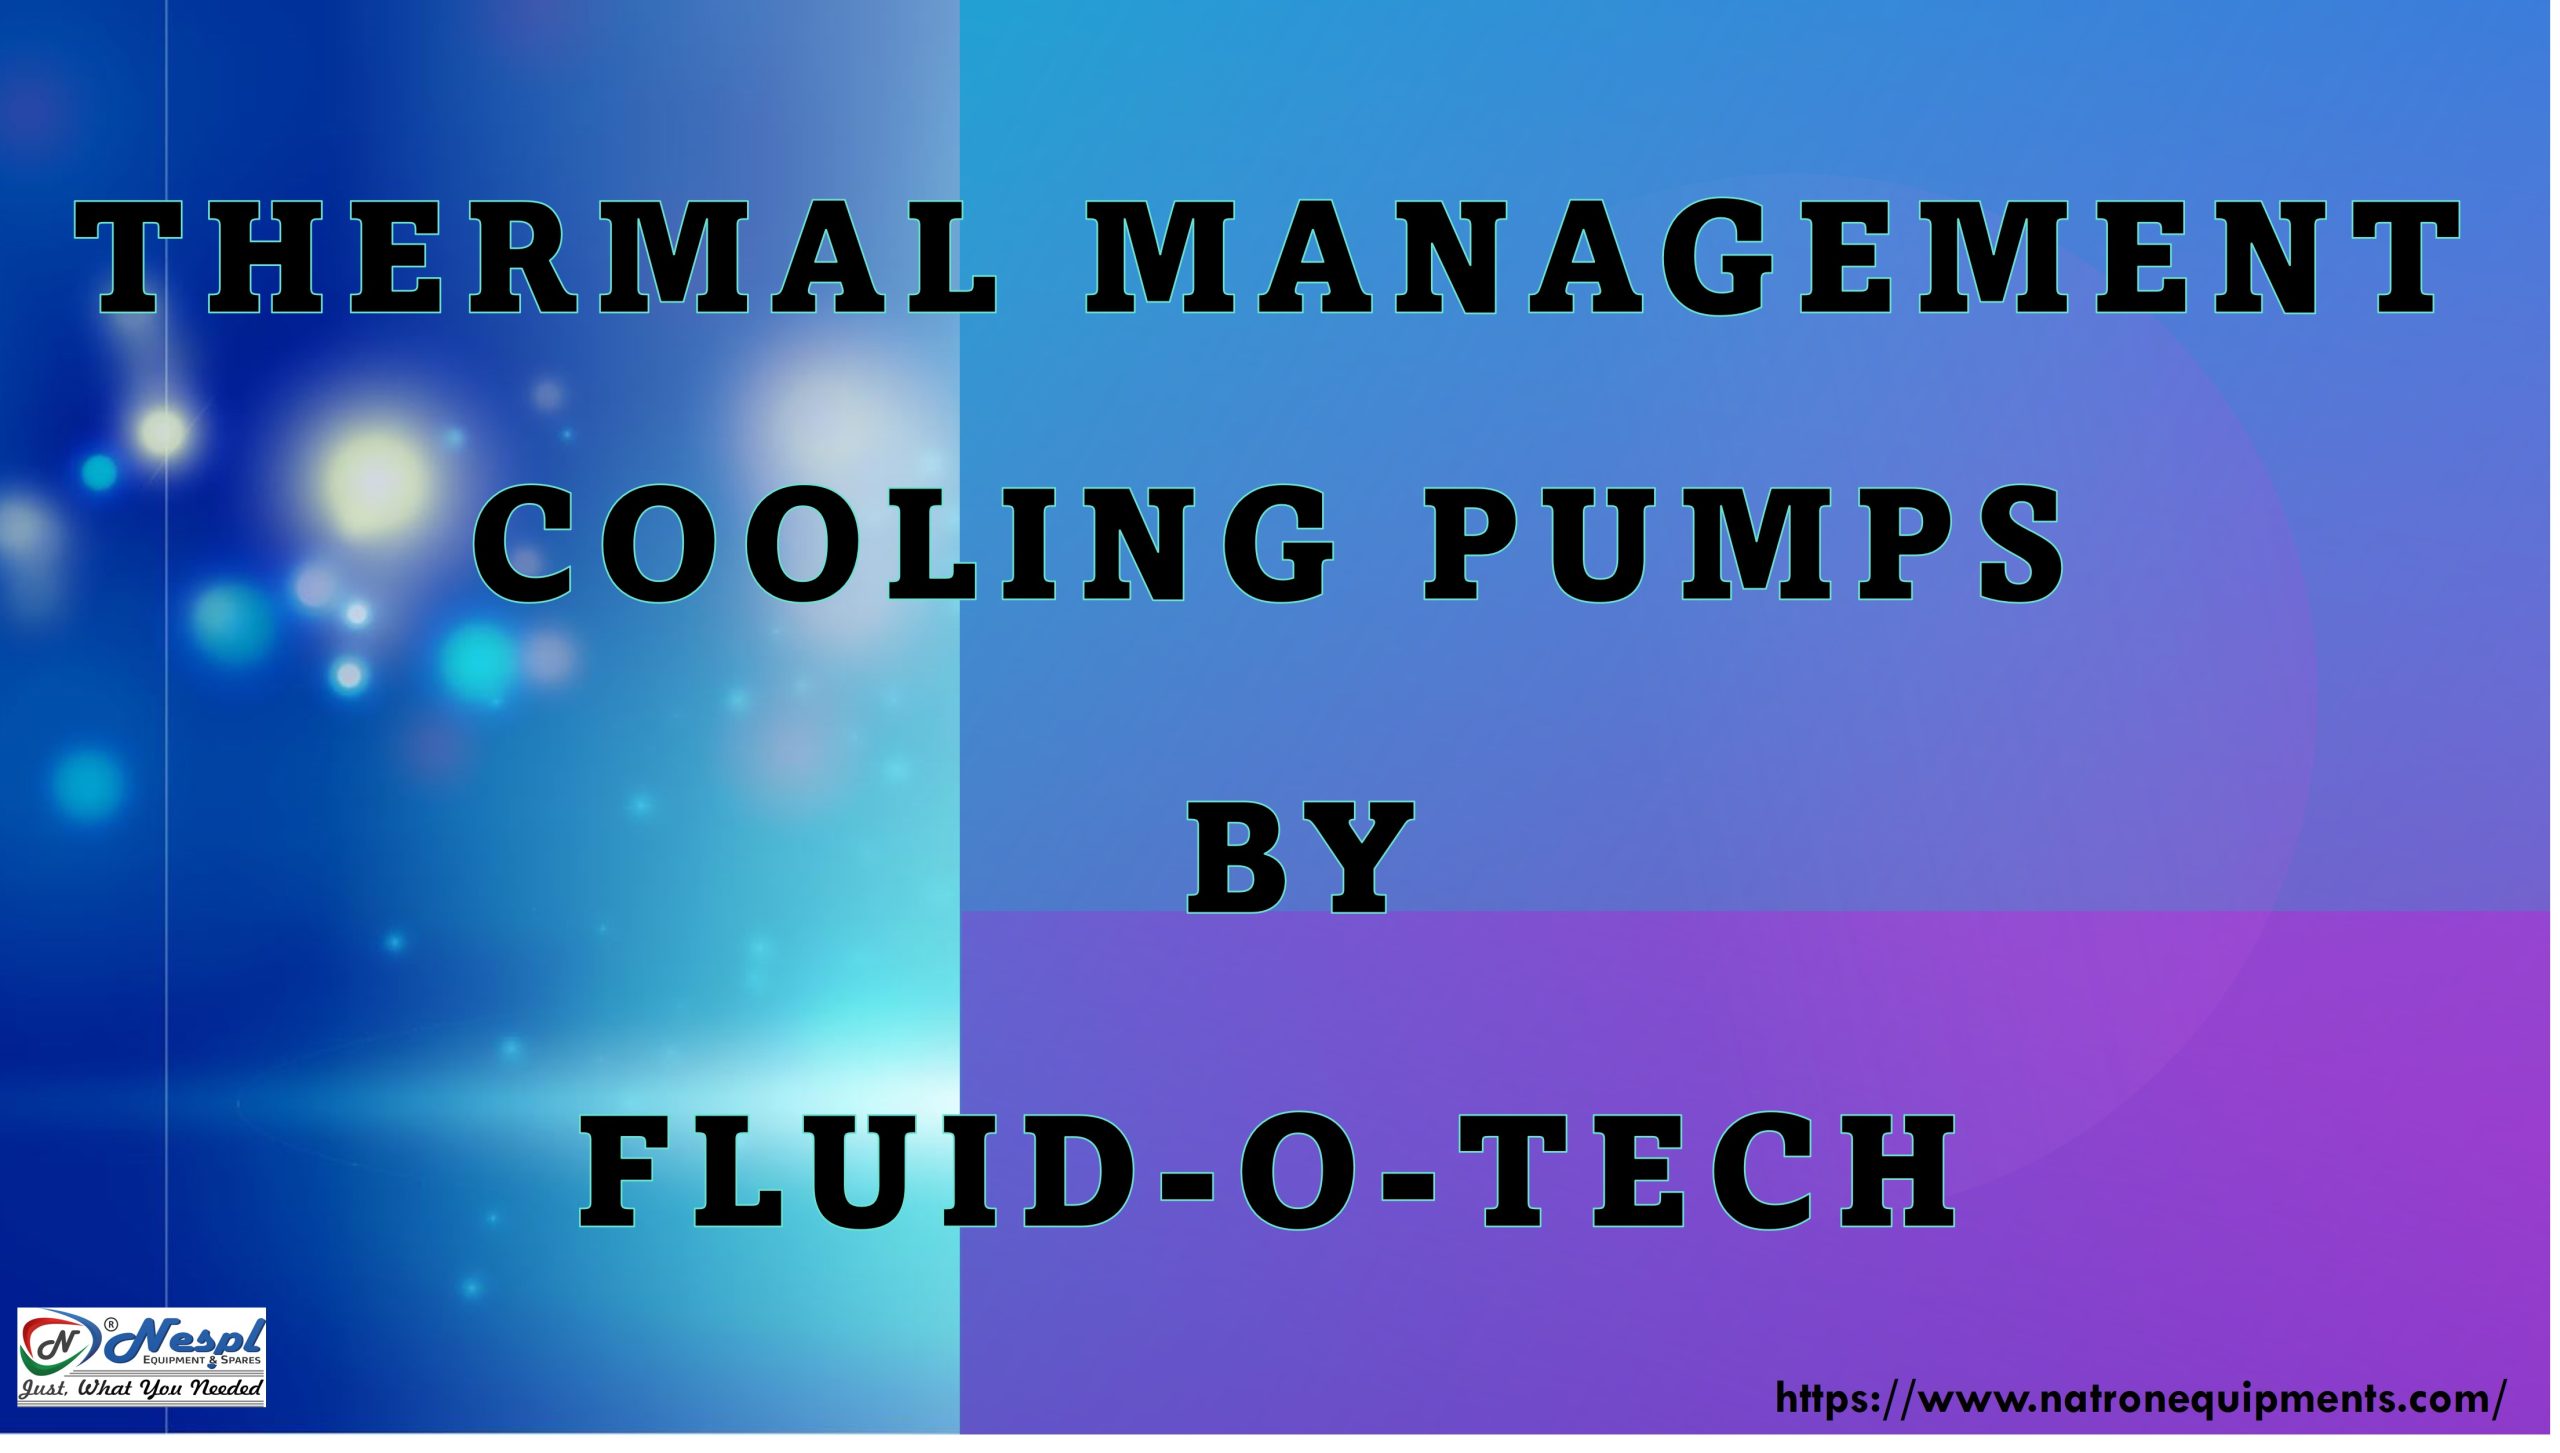 Thermal Management Cooling Pumps by Fluid-O-Tech